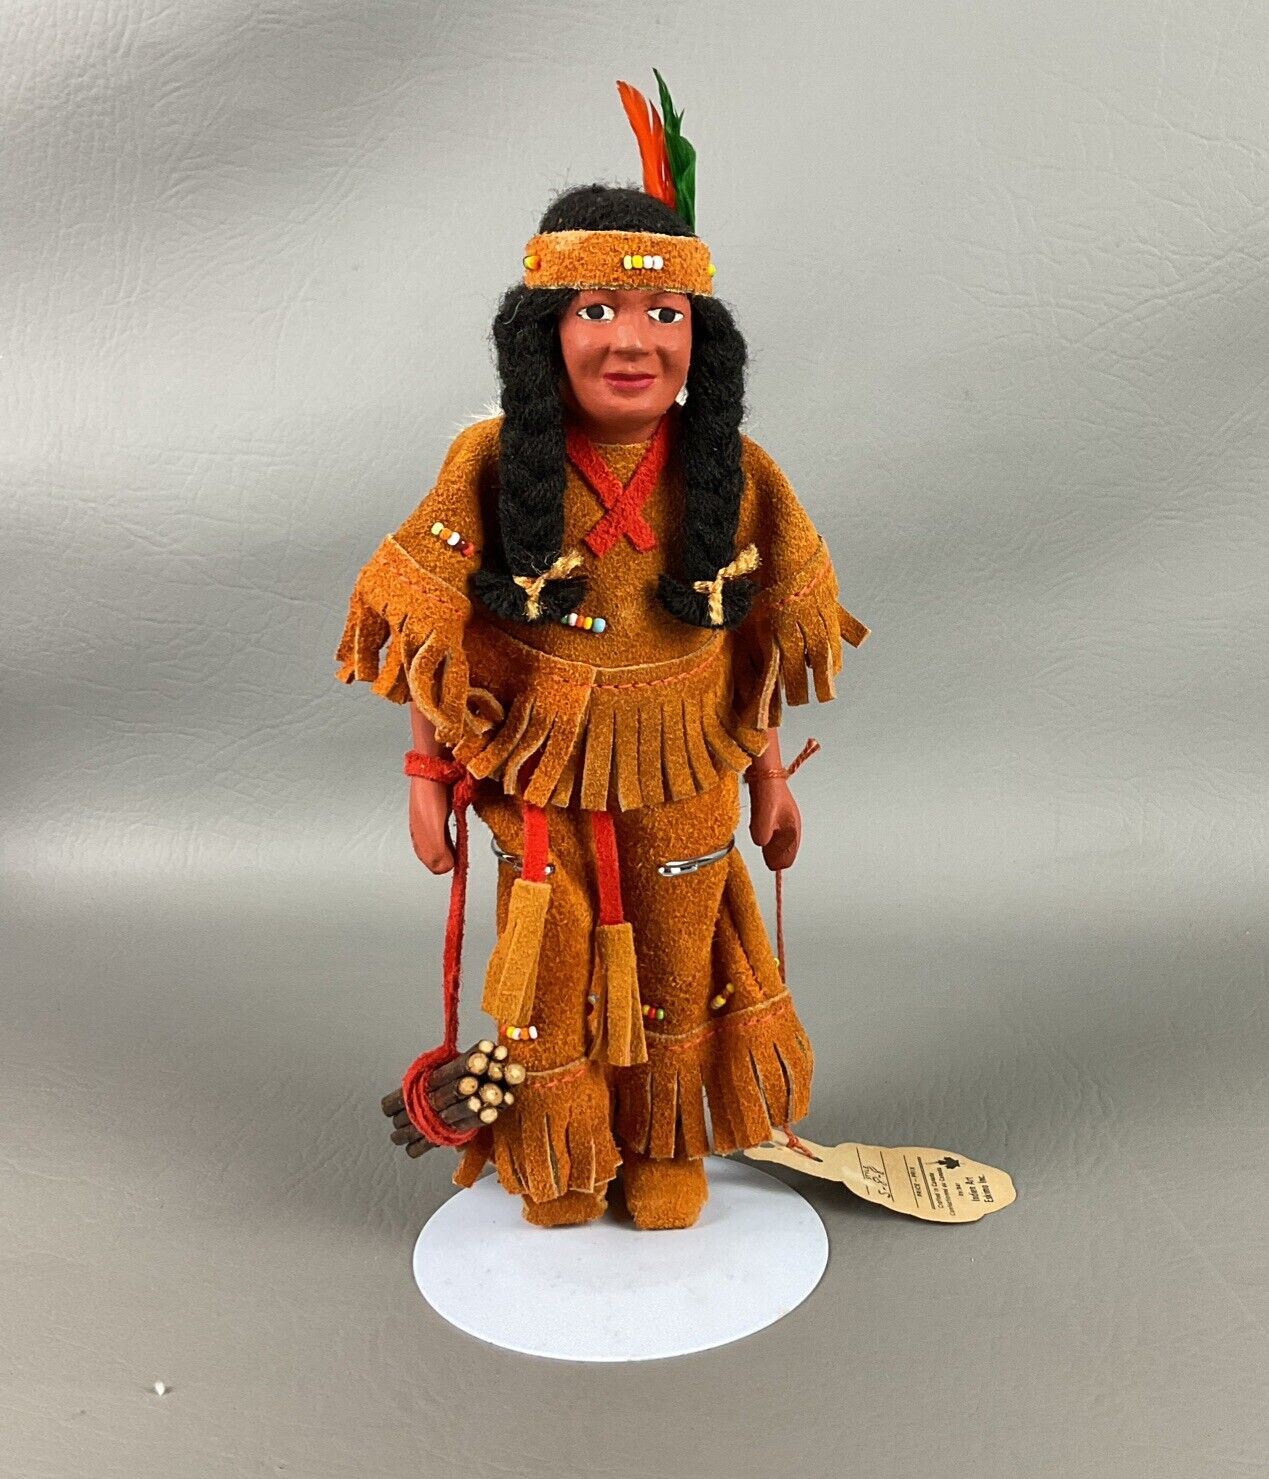 Vintage and RARE 1950s Skookum Native American Indian Doll With Original Tag